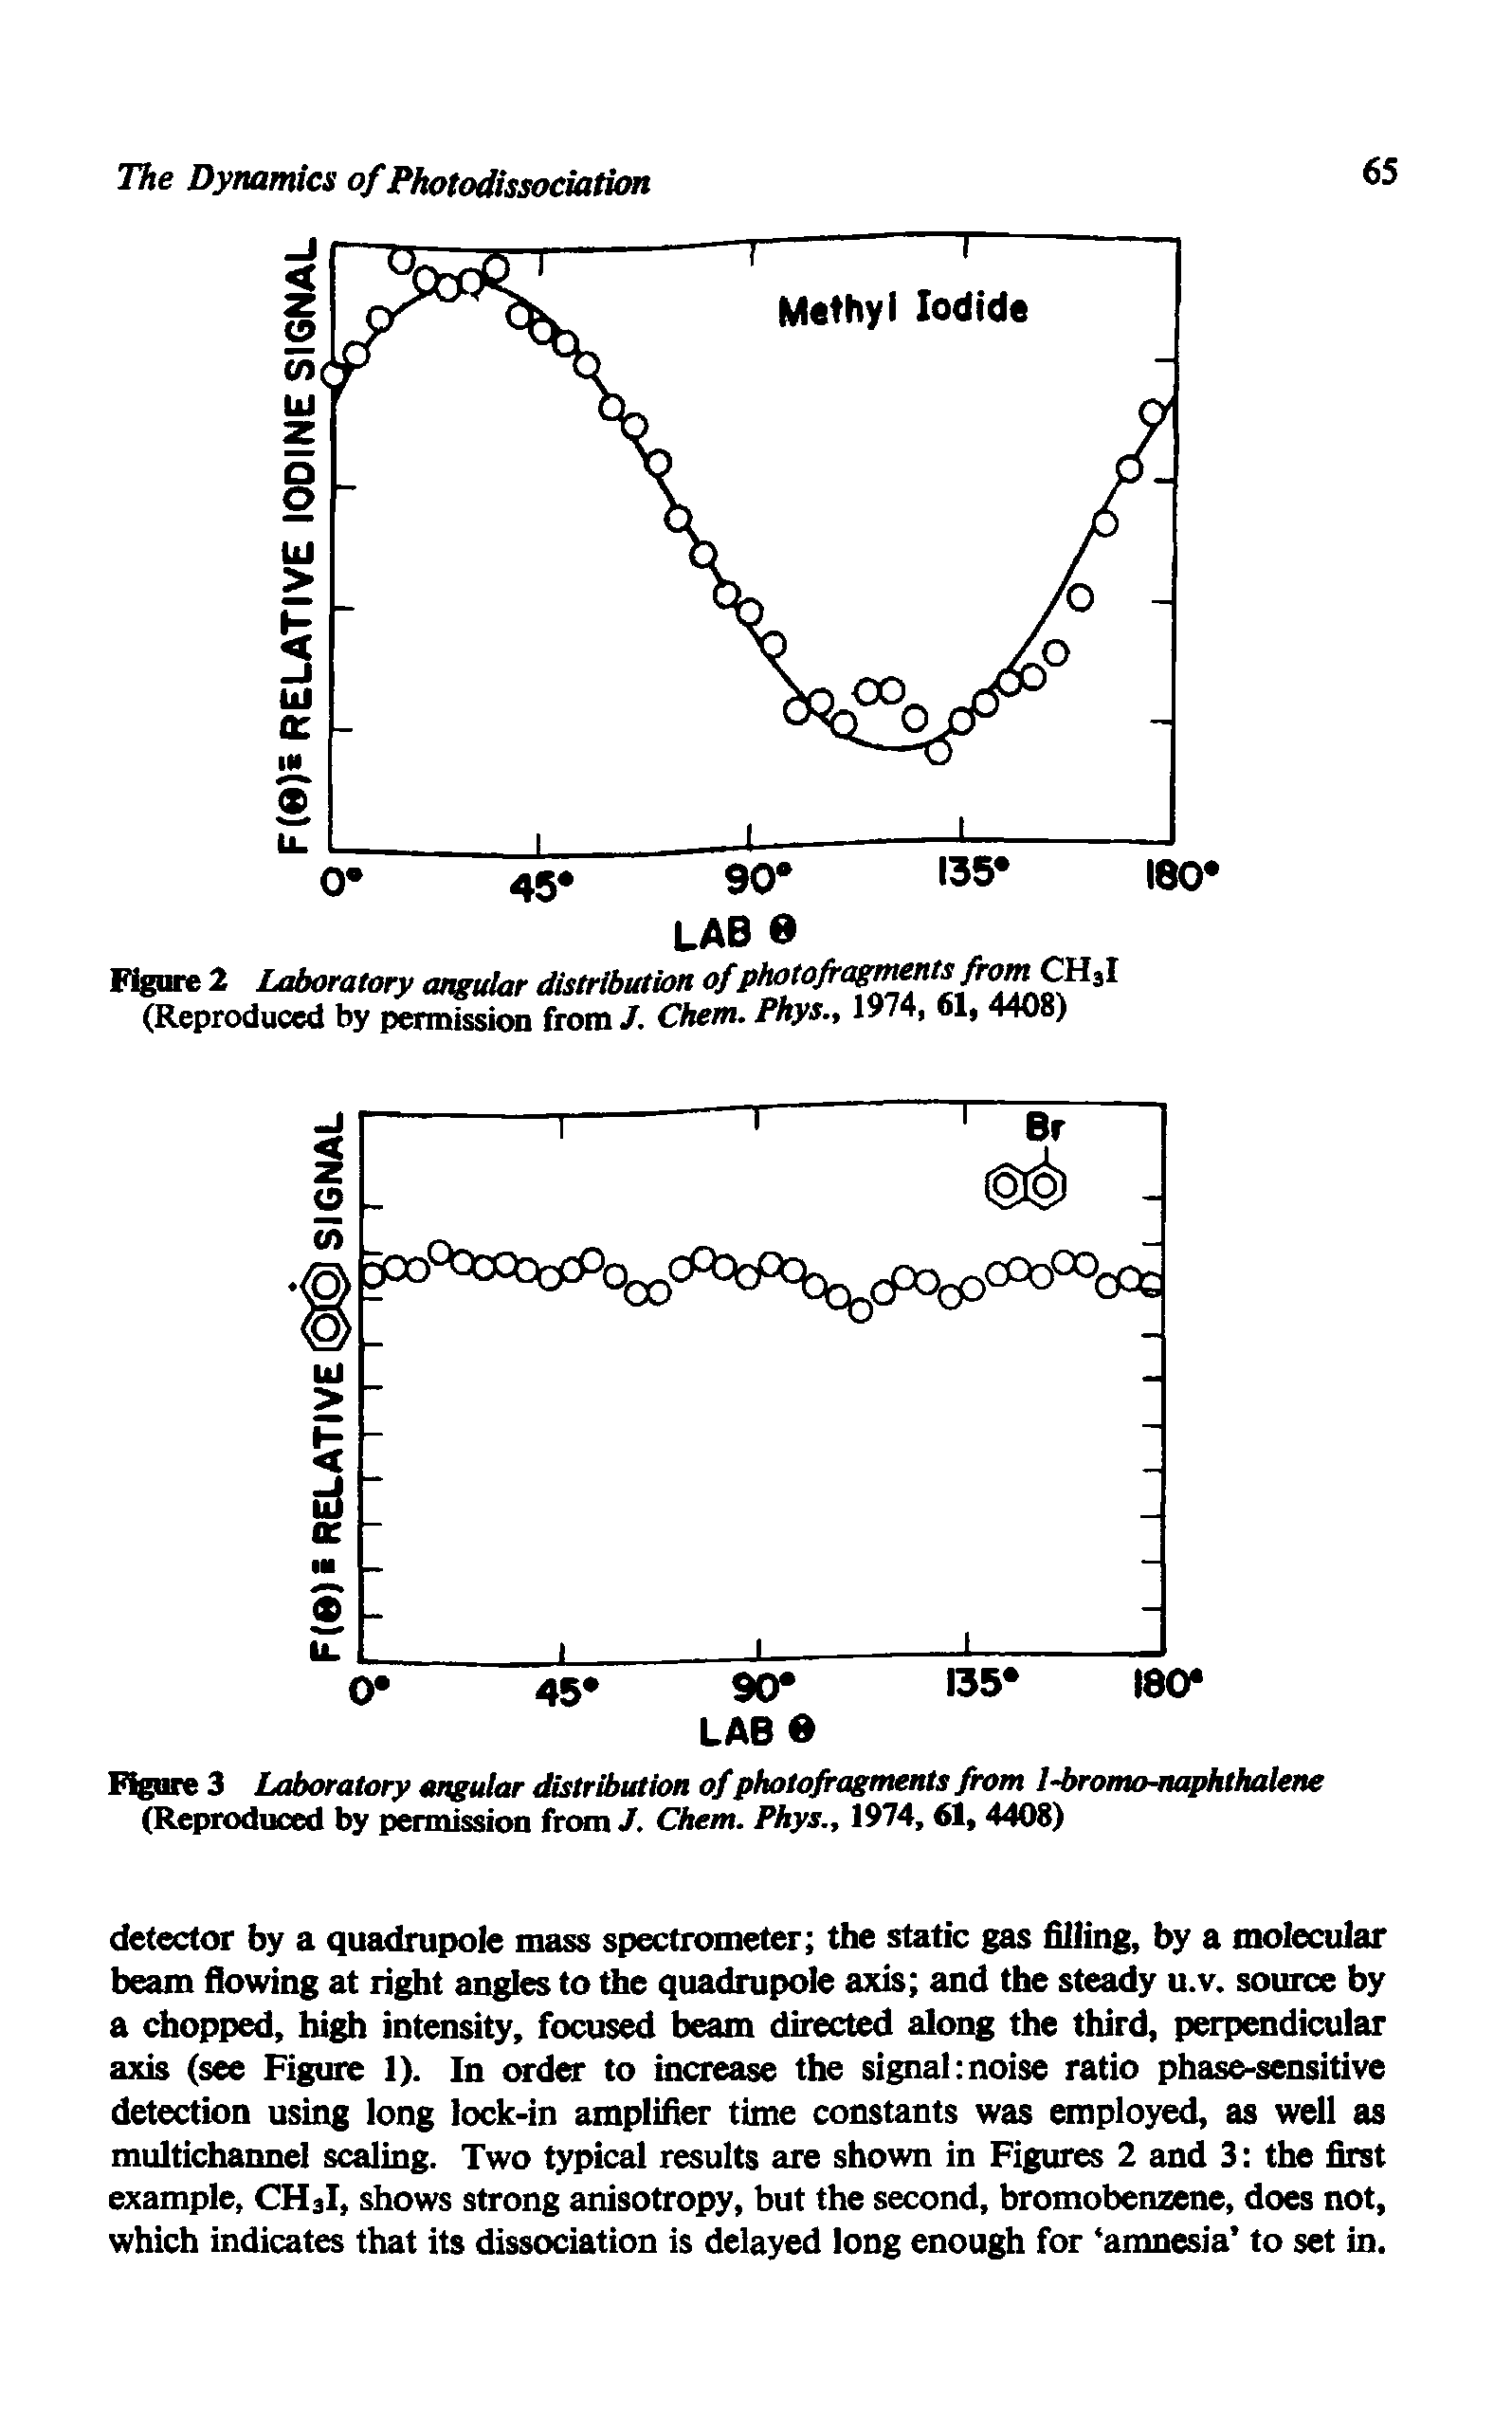 Figure 3 Laboratory angular distribution of photofragments from 1-bromo-naphthaiene (Reproduced by permission from J. Chem. Phys., 1974,61,4408)...